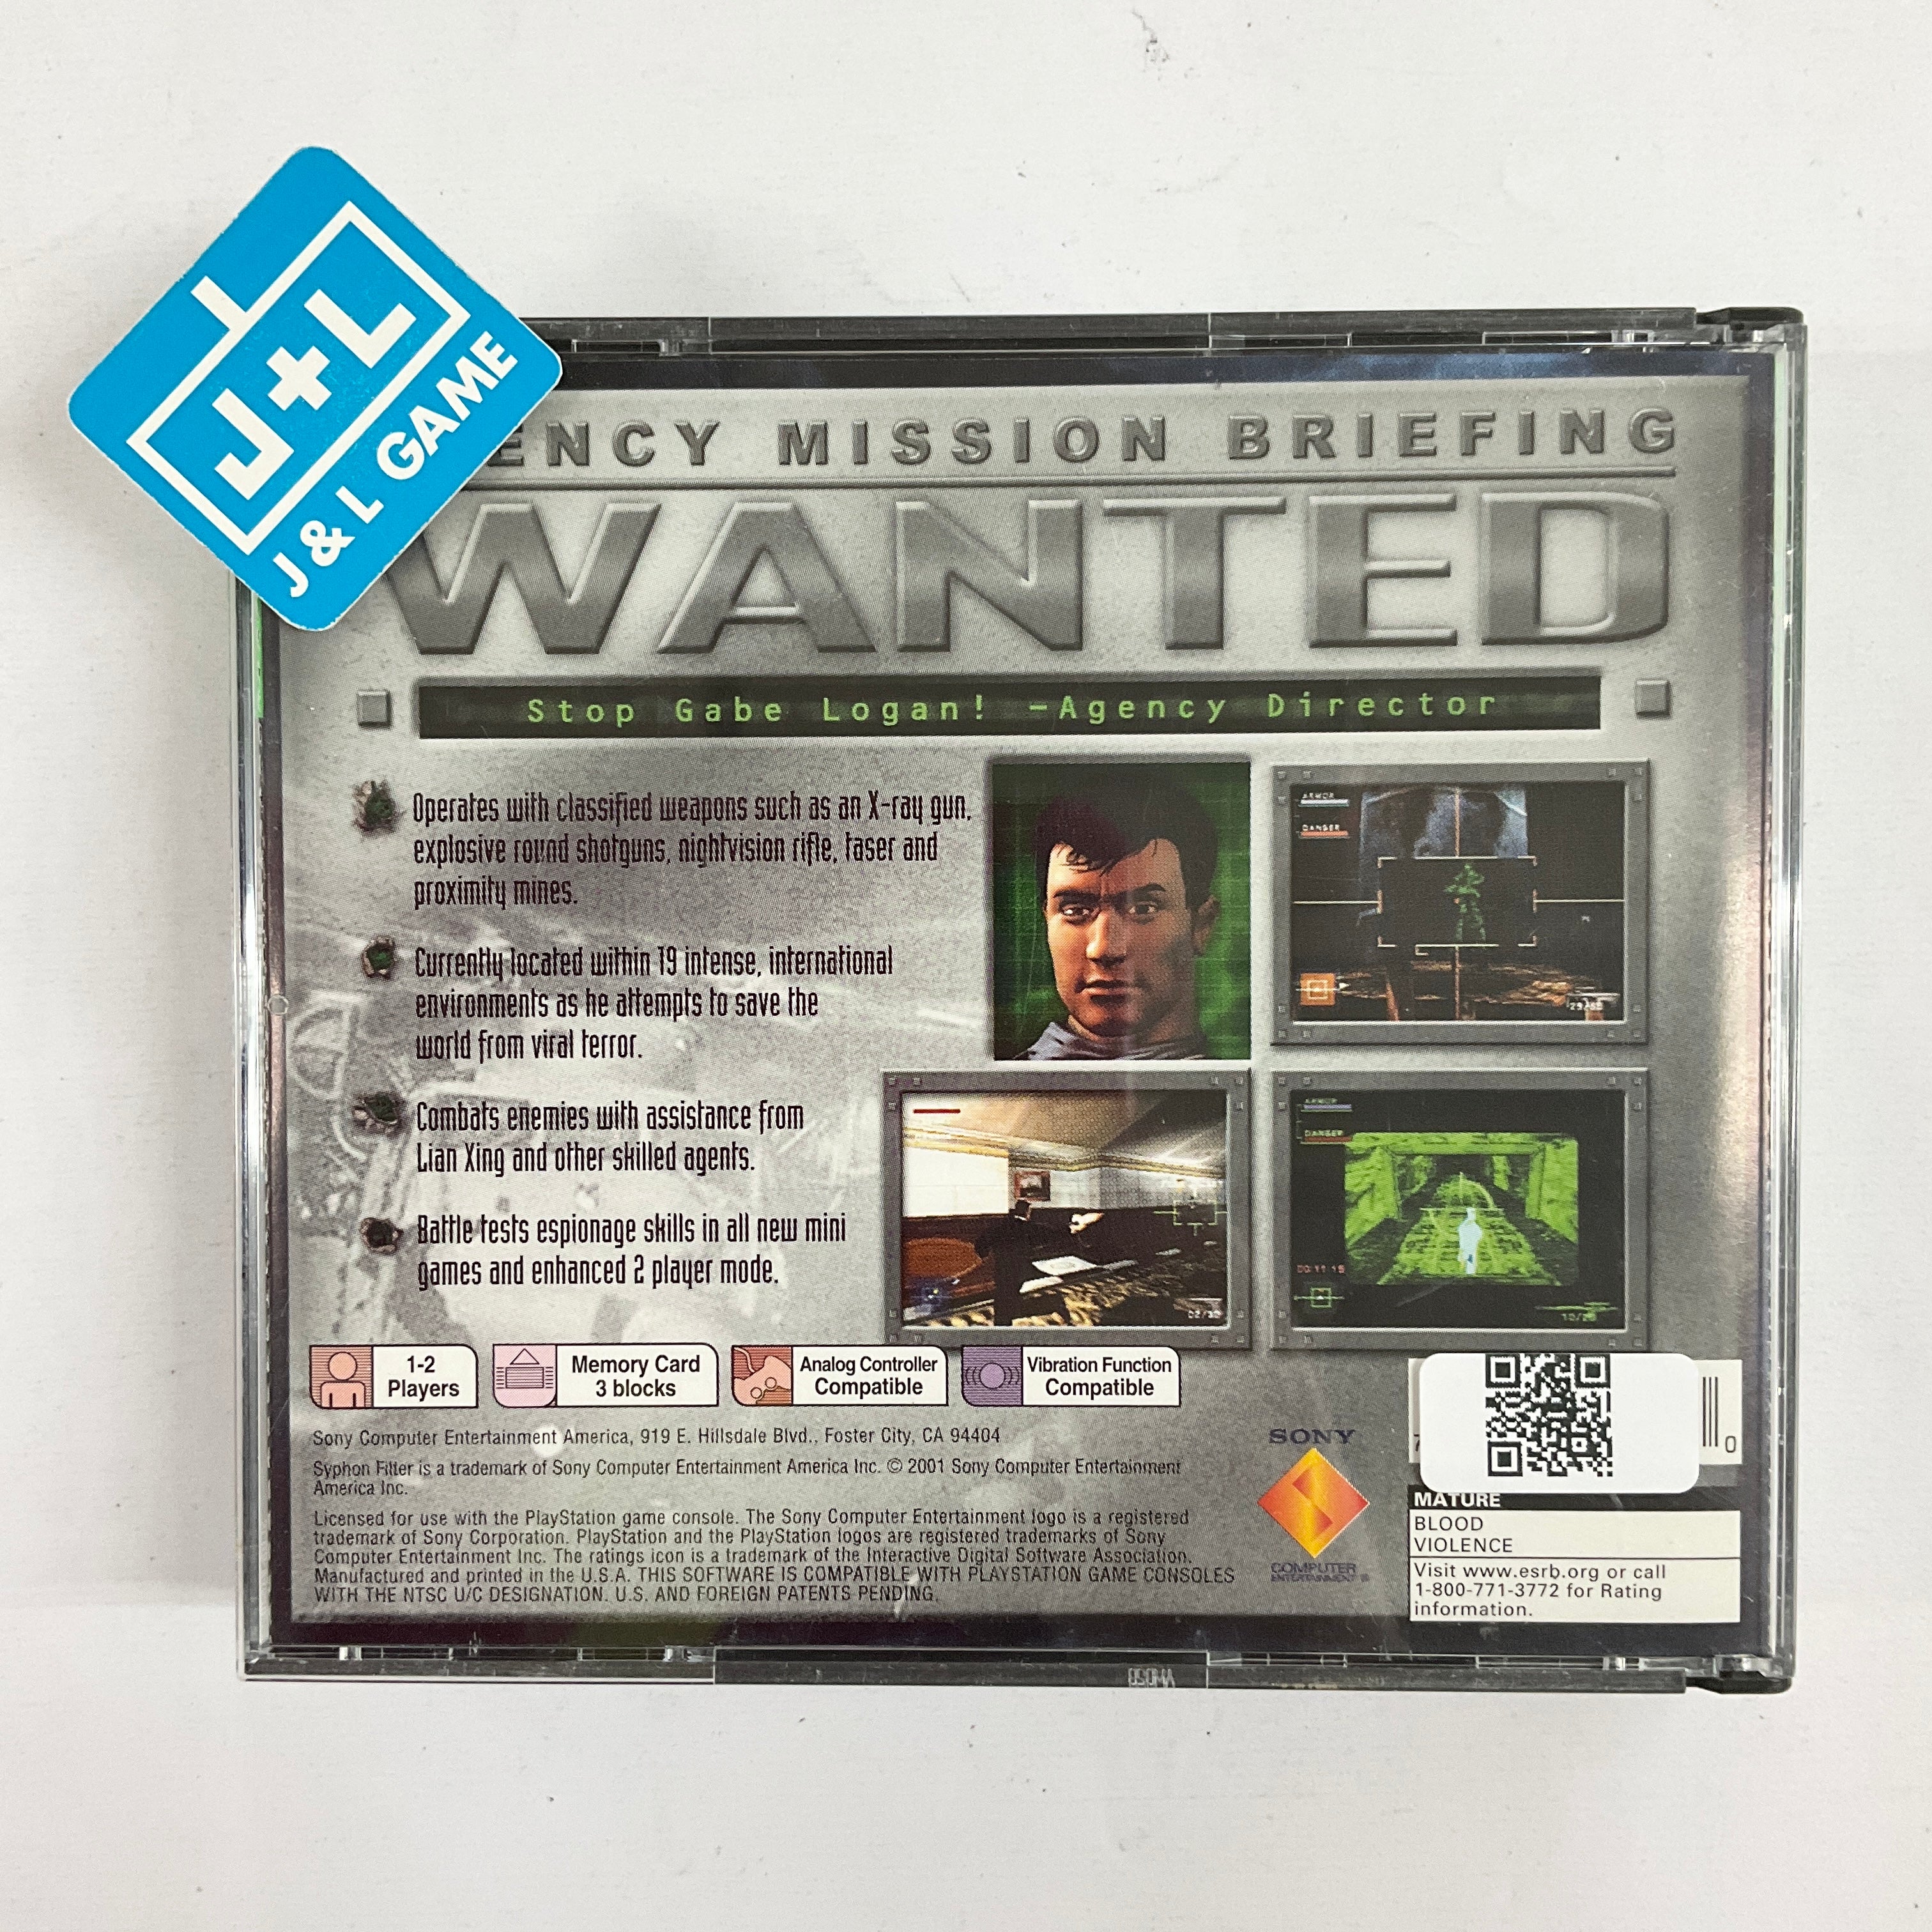 Syphon Filter 3 (Greatest Hits) - (PS1) PlayStation [Pre-Owned] Video Games Sony   